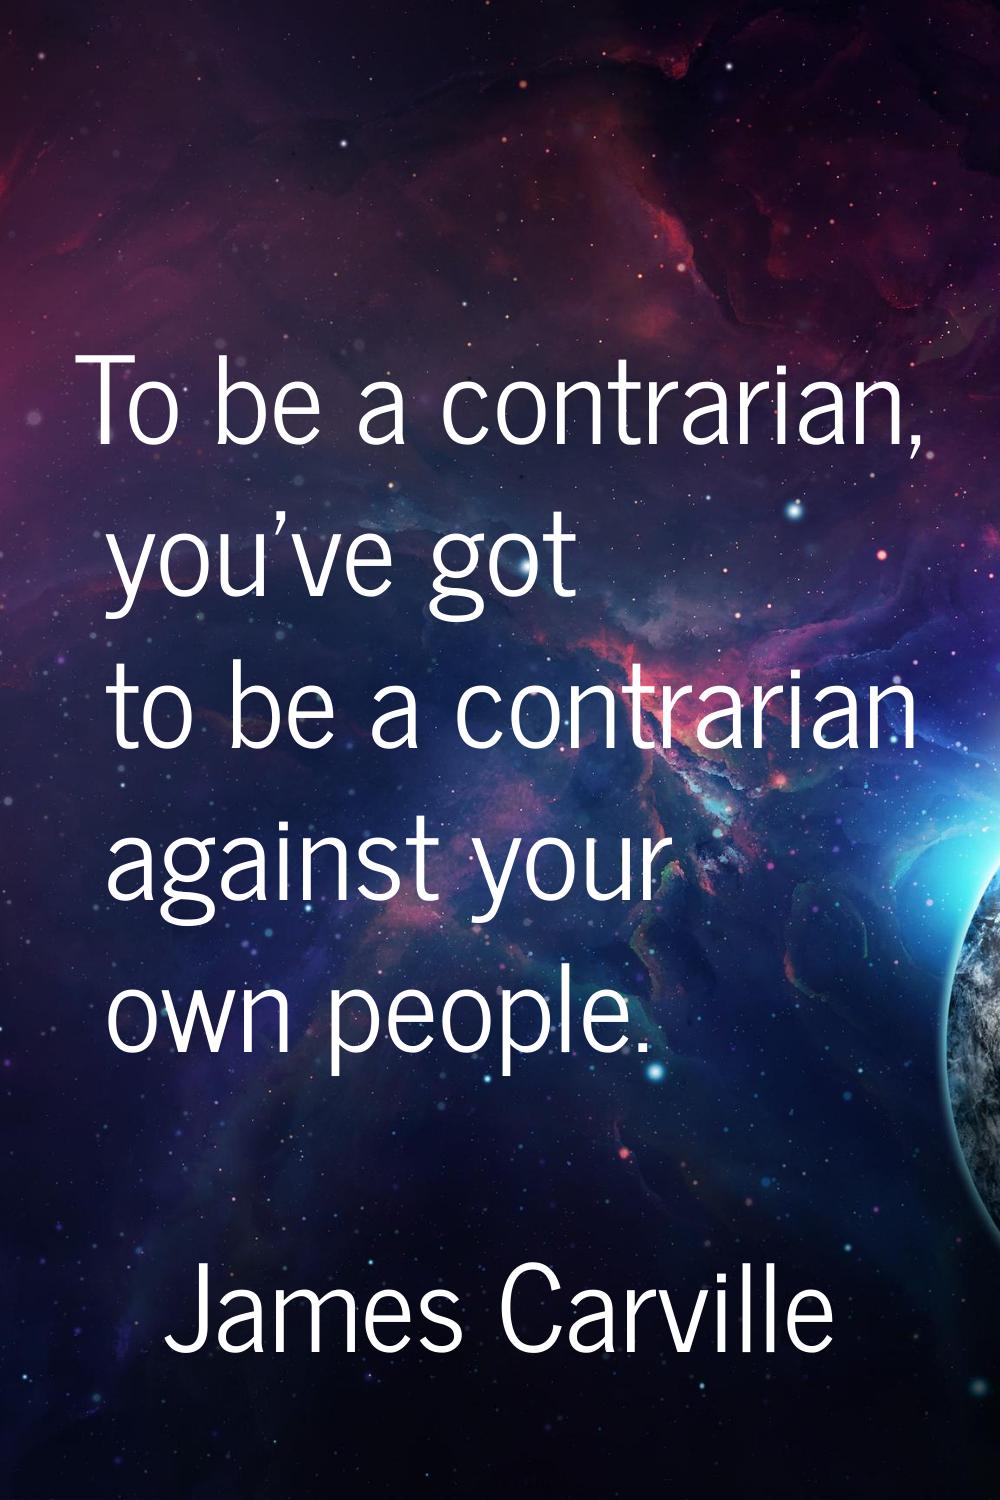 To be a contrarian, you've got to be a contrarian against your own people.